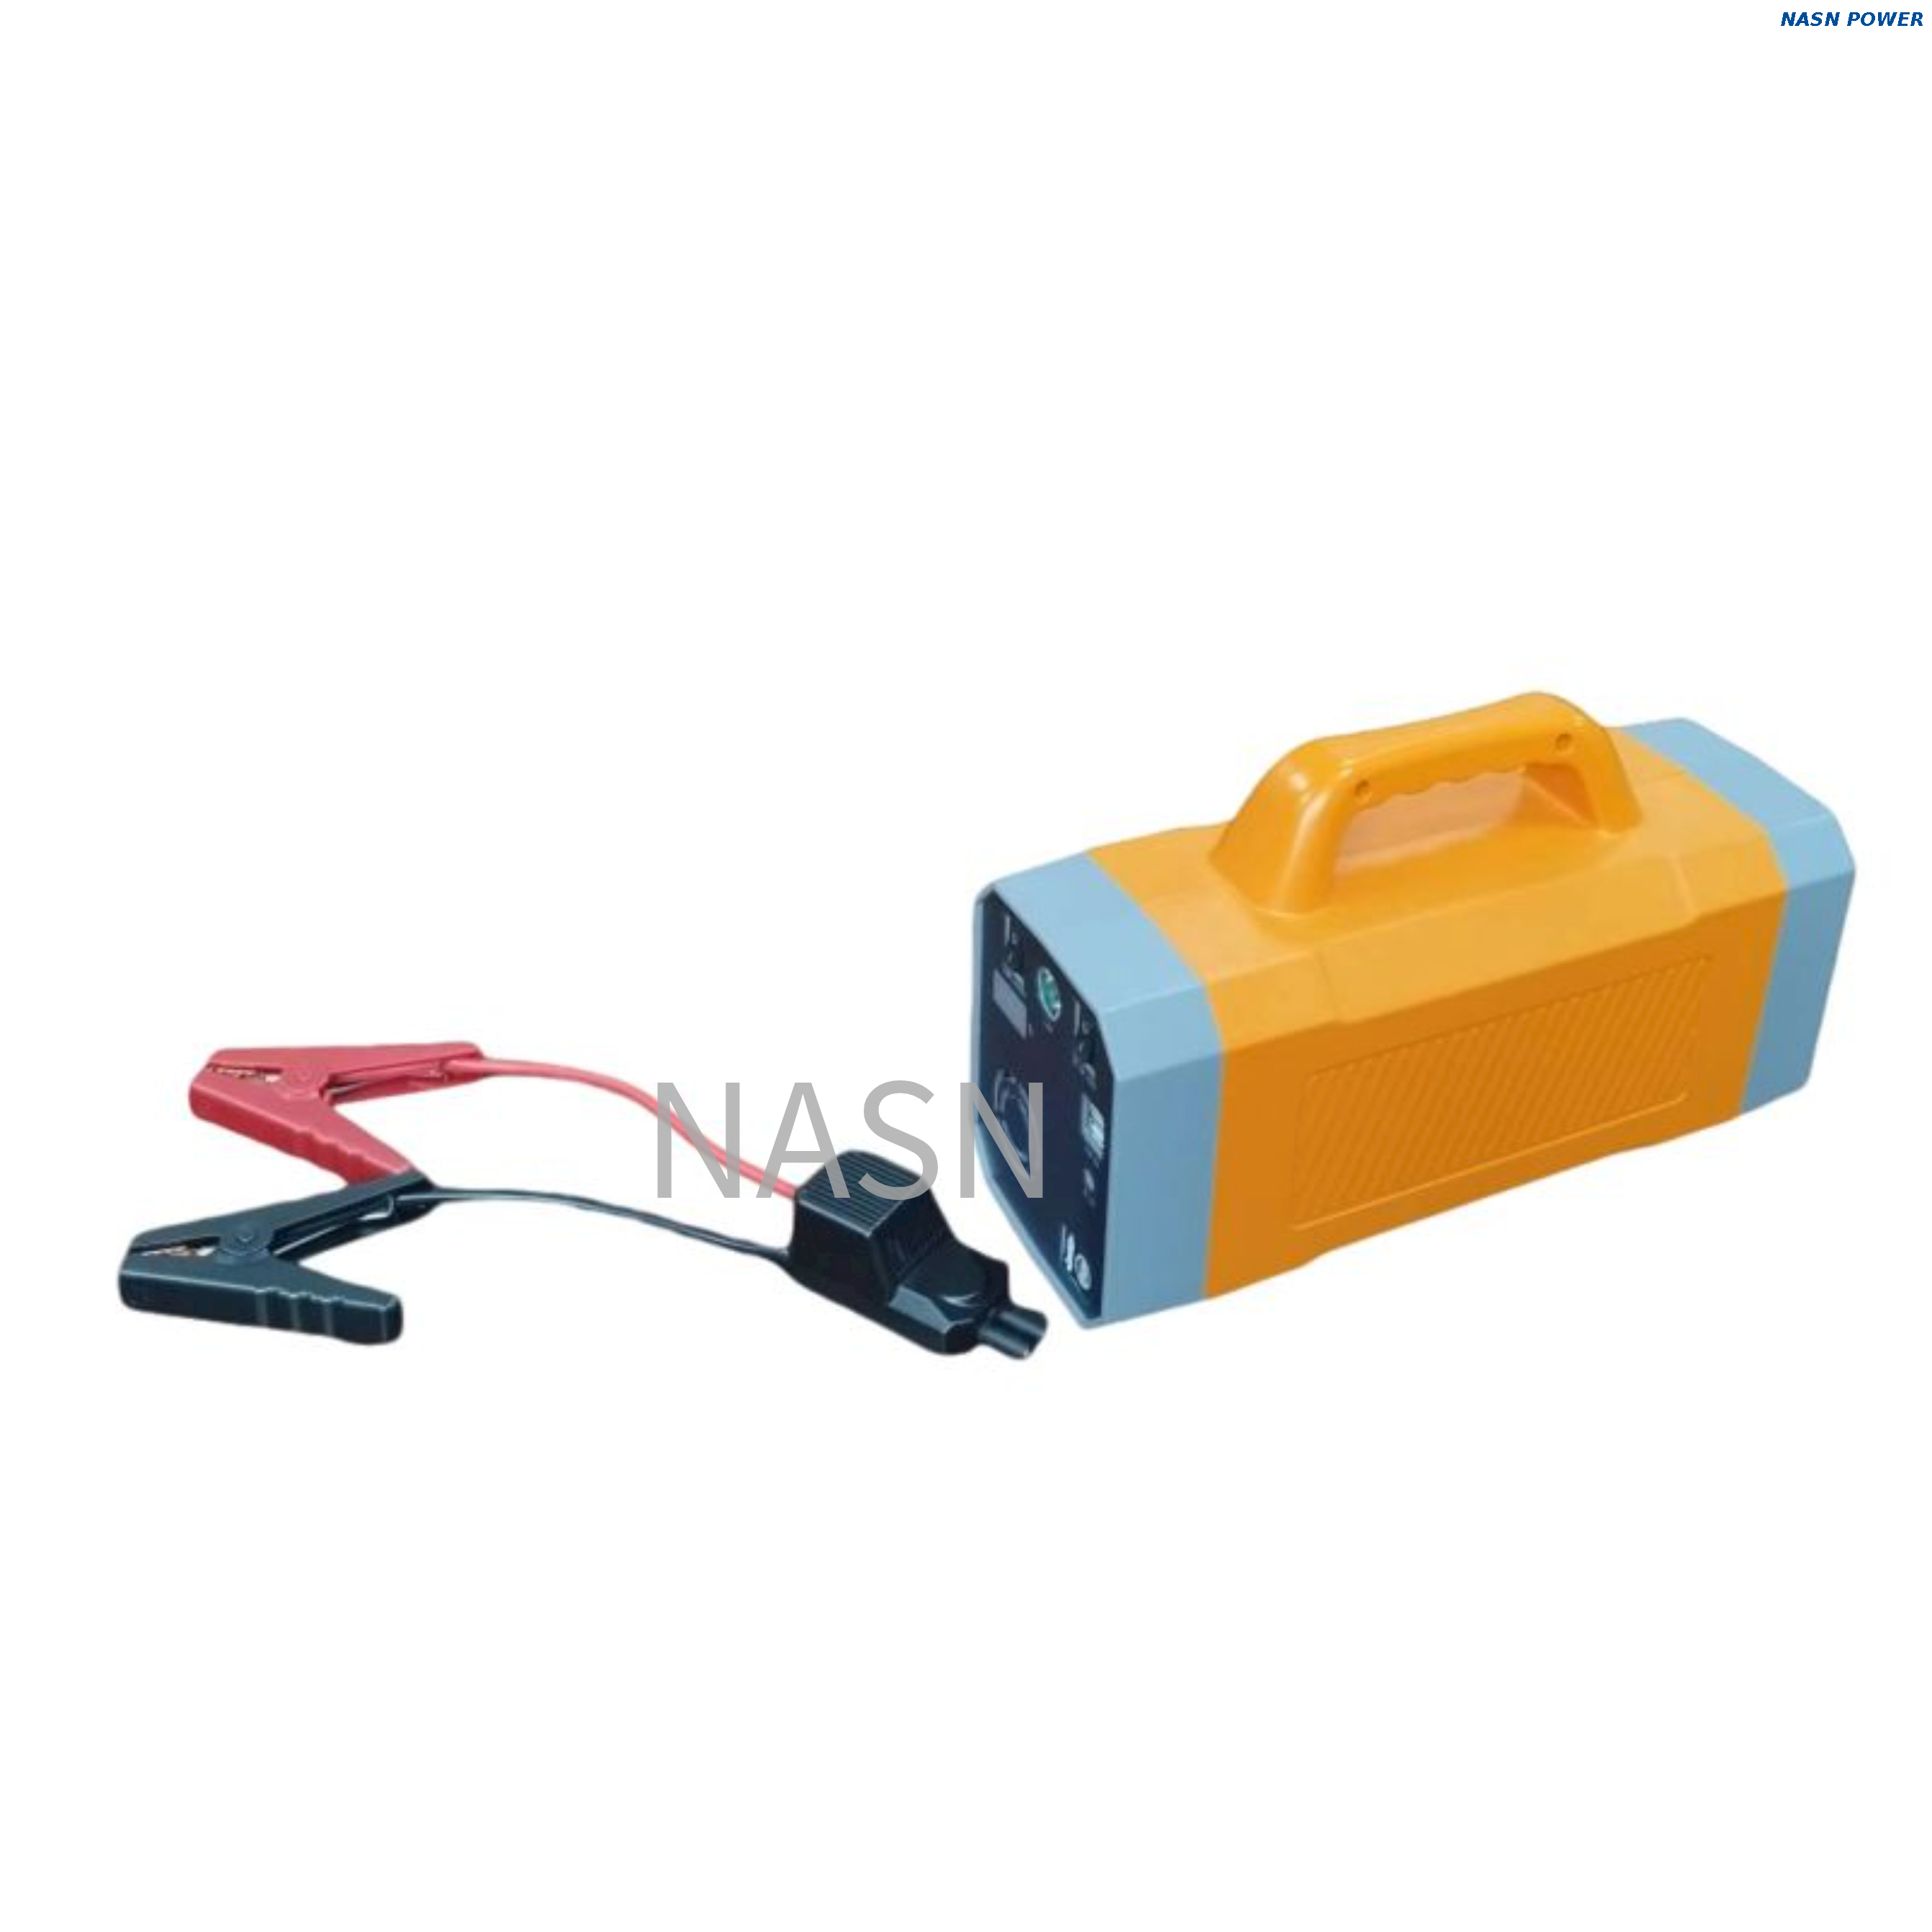 500w Portable POWER STATION Built in Lithium Iron Phosphate Battery